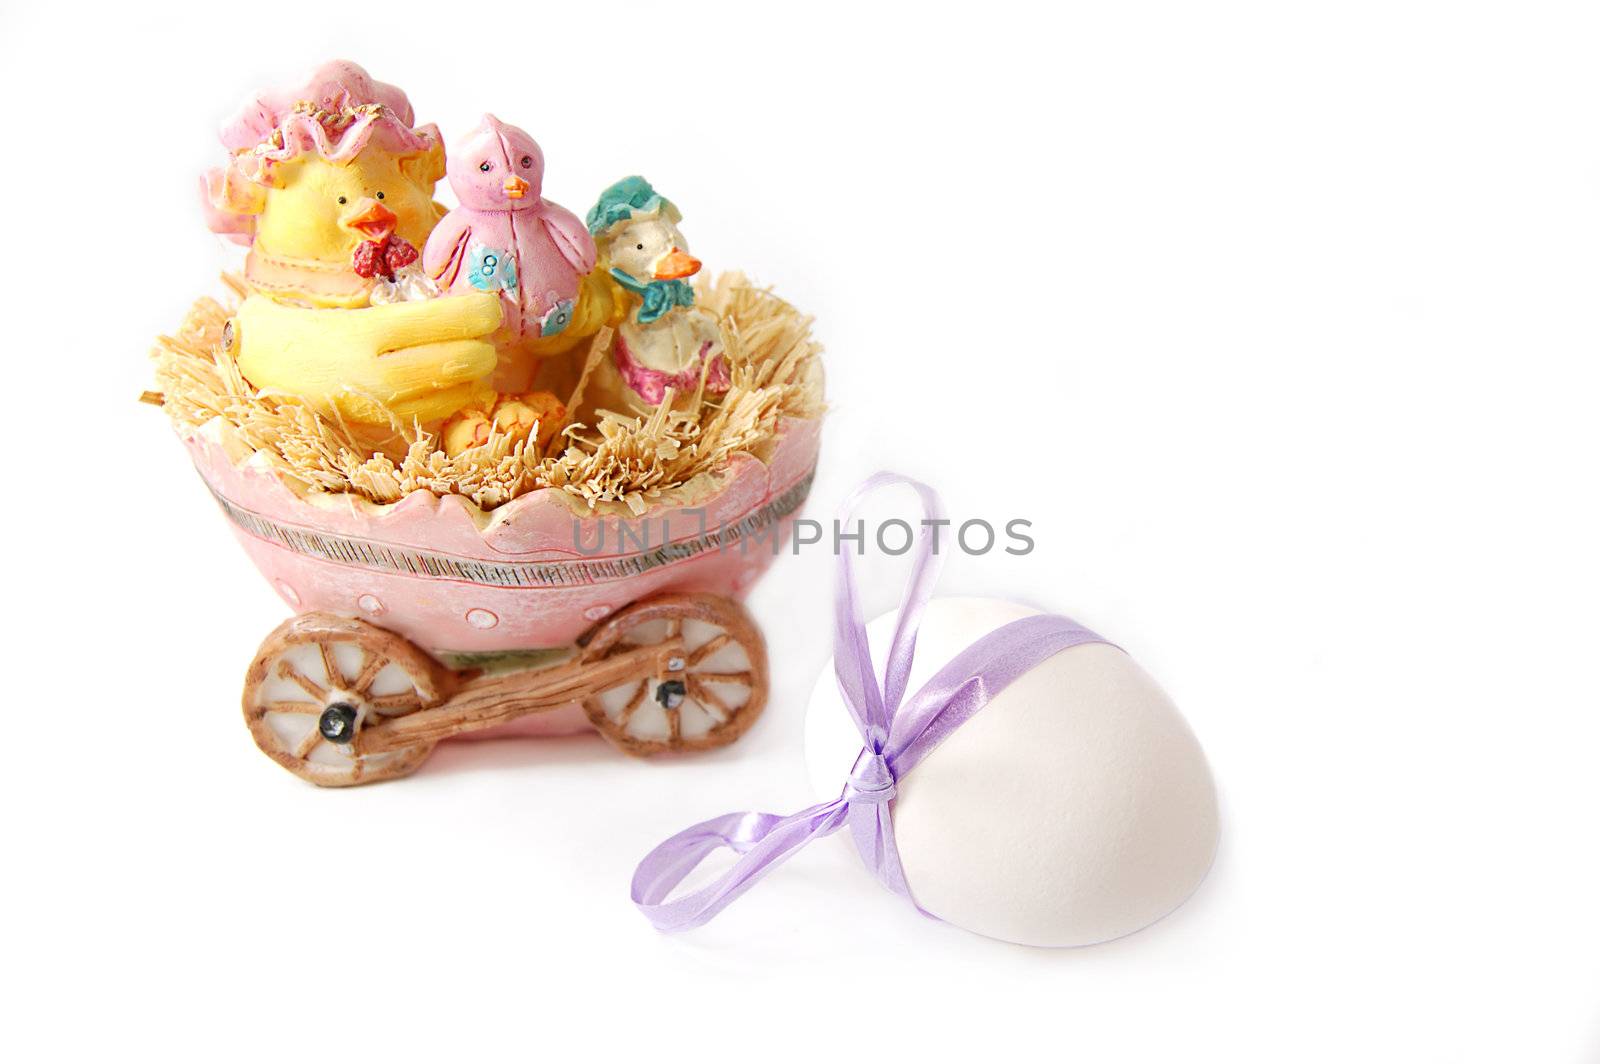 Chicken figurine and egg isolated on white